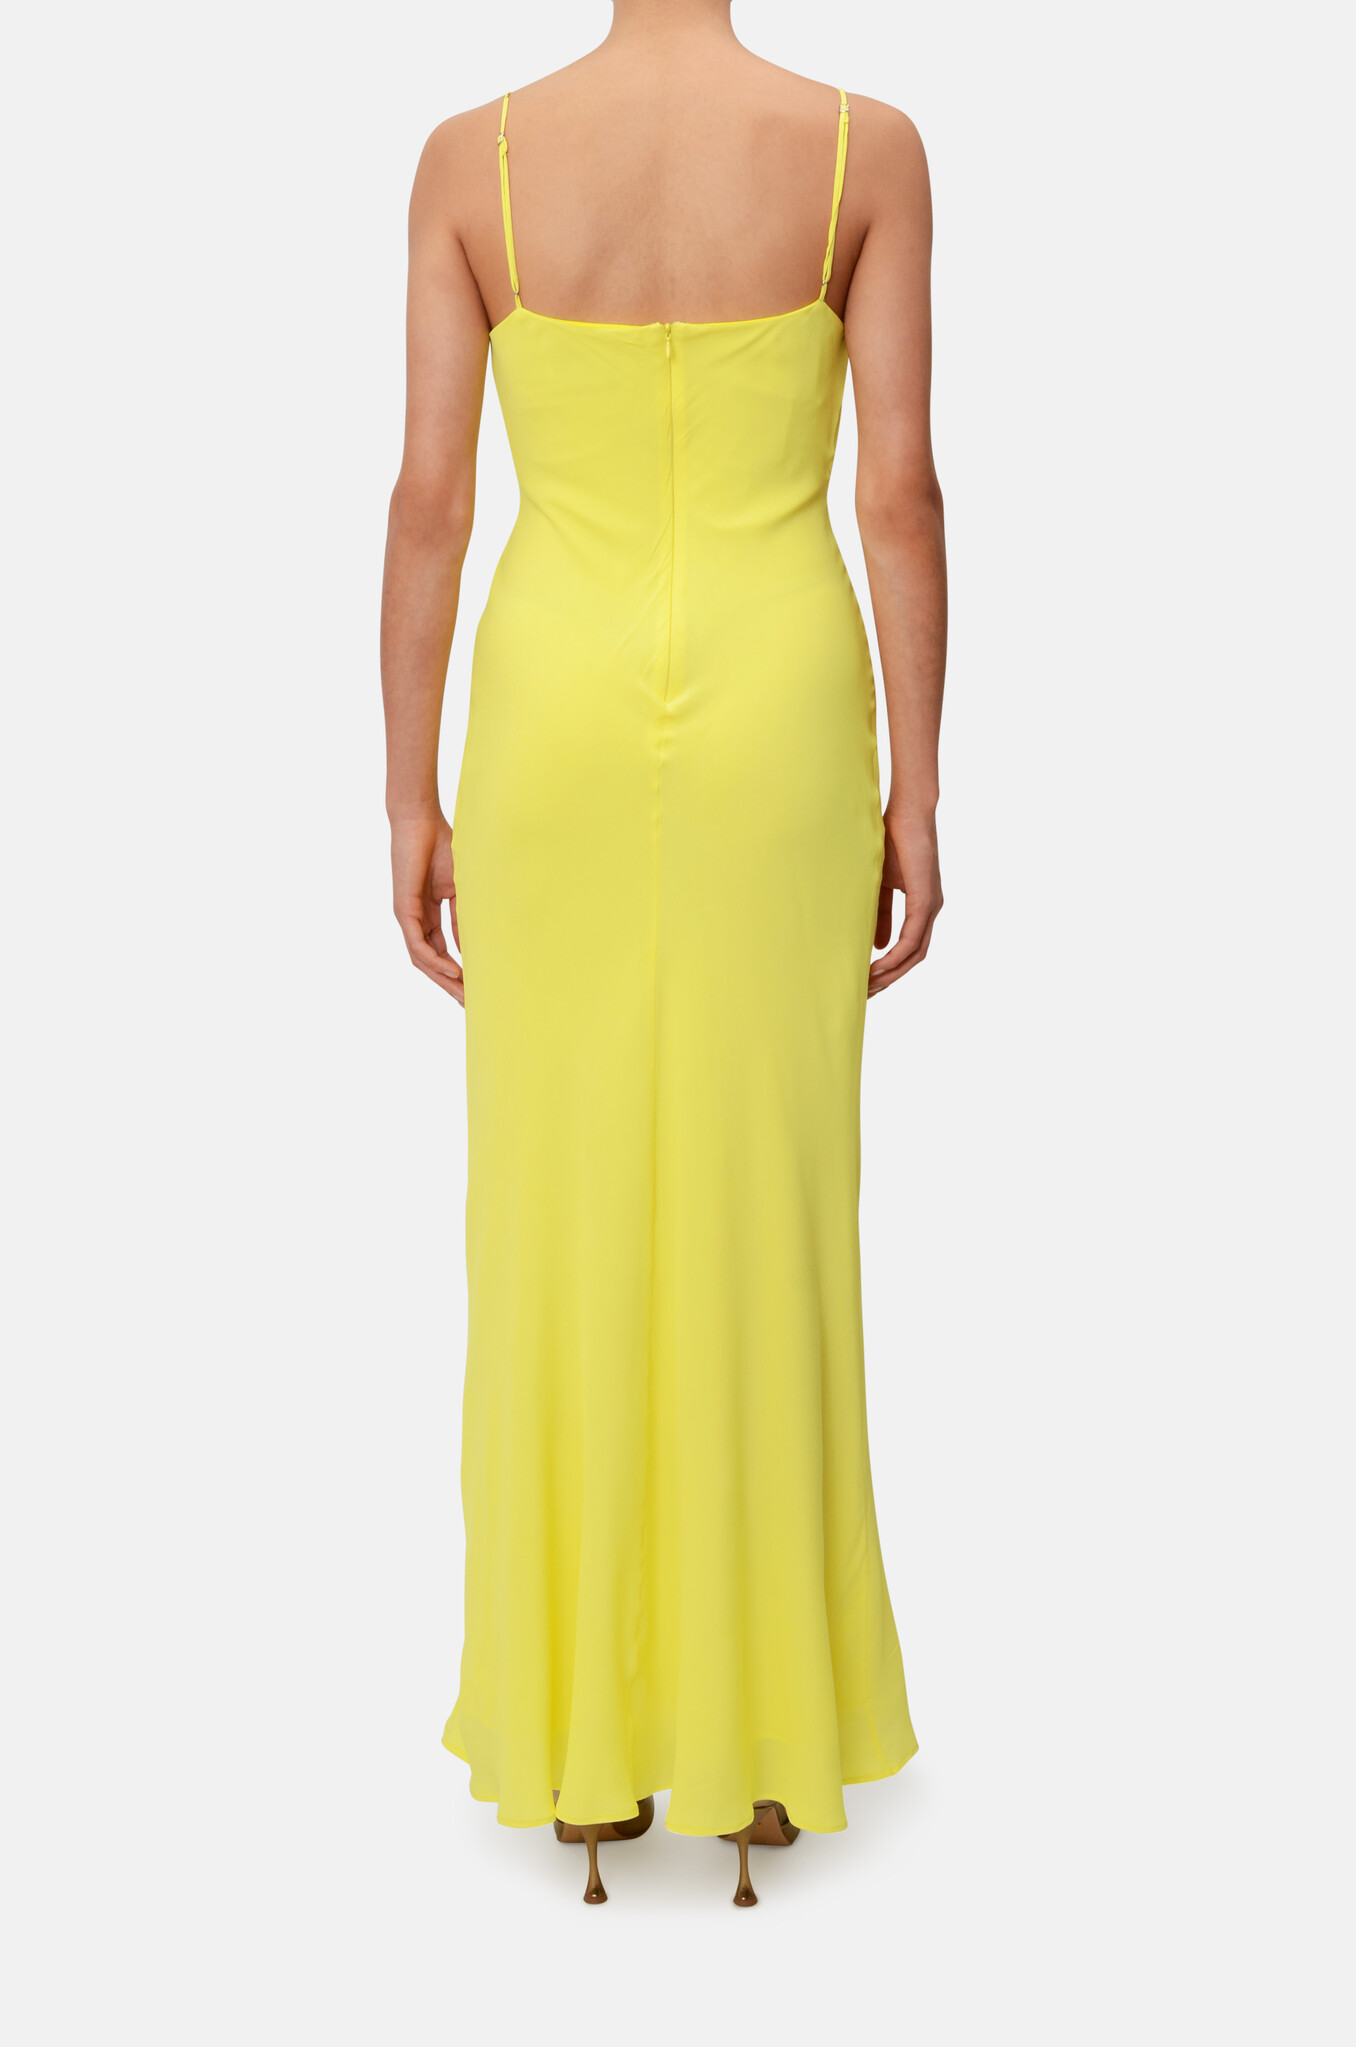 Twisted Front Slipdress in Bright Yellow-4